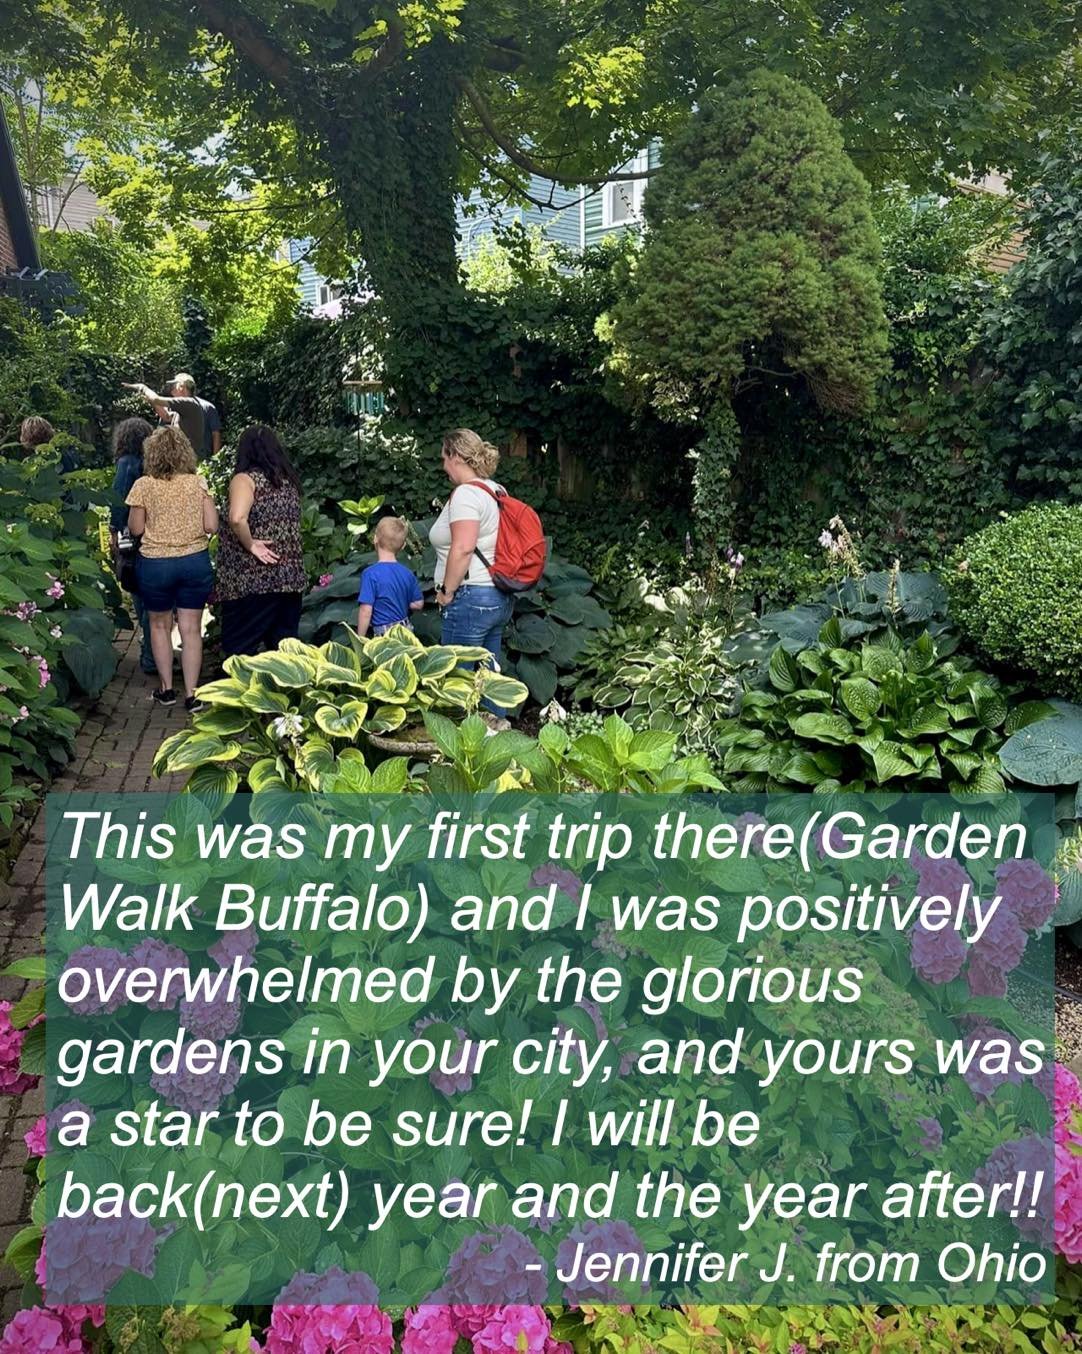 Let&rsquo;s overwhelm visitors like Jennifer again this July! Sign up your garden on Garden Walk Buffalo. Today is the FINAL DAY to sign up at www.GardenWalkBuffalo.com.

(Visitors on Garden Walk Buffalo at a Cottage District garden. Photo Courtesy o